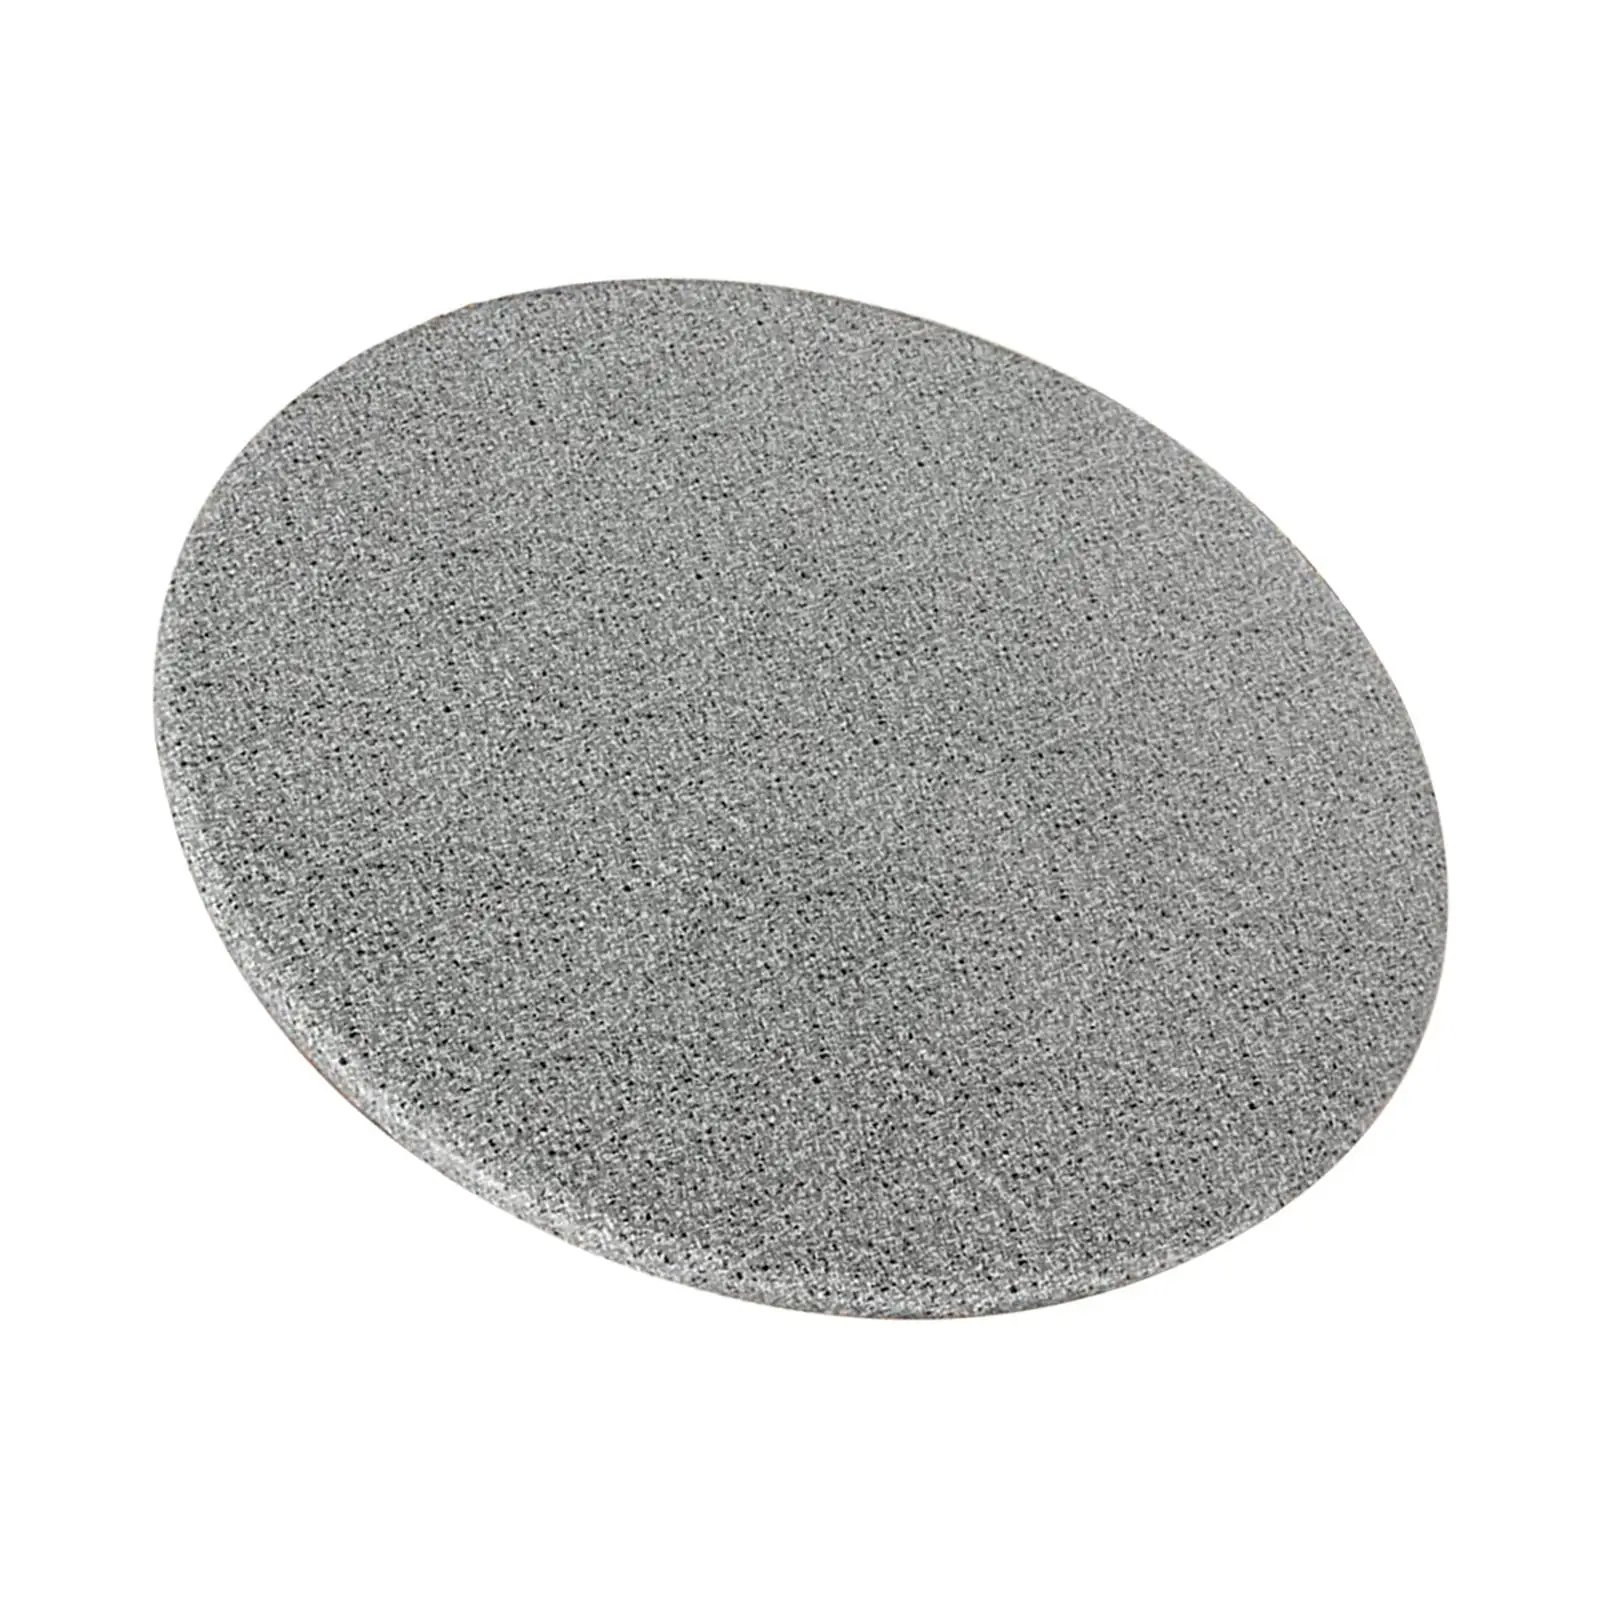 Oilproof Round Table Cloth Elasticized Table Cover Flannel Backing Granite Pattern Tablecloth for Banquet Dining Table Picnic